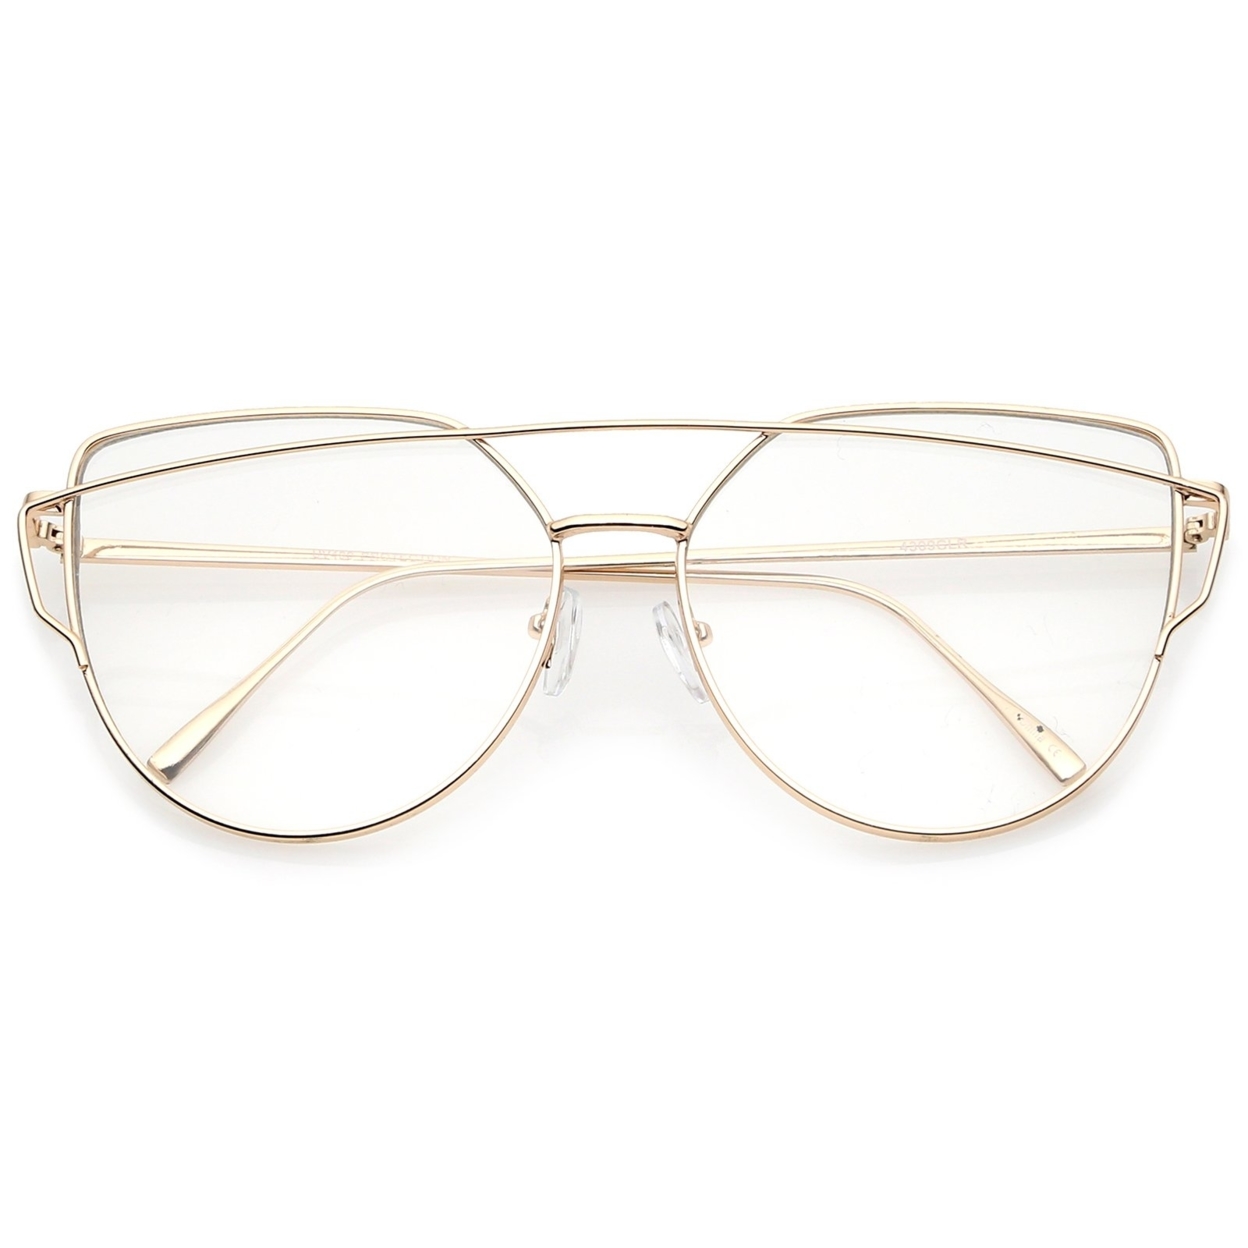 Oversize Metal Frame Thin Temple Clear Flat Lens Aviator Eyeglasses 62mm - Gold / Clear